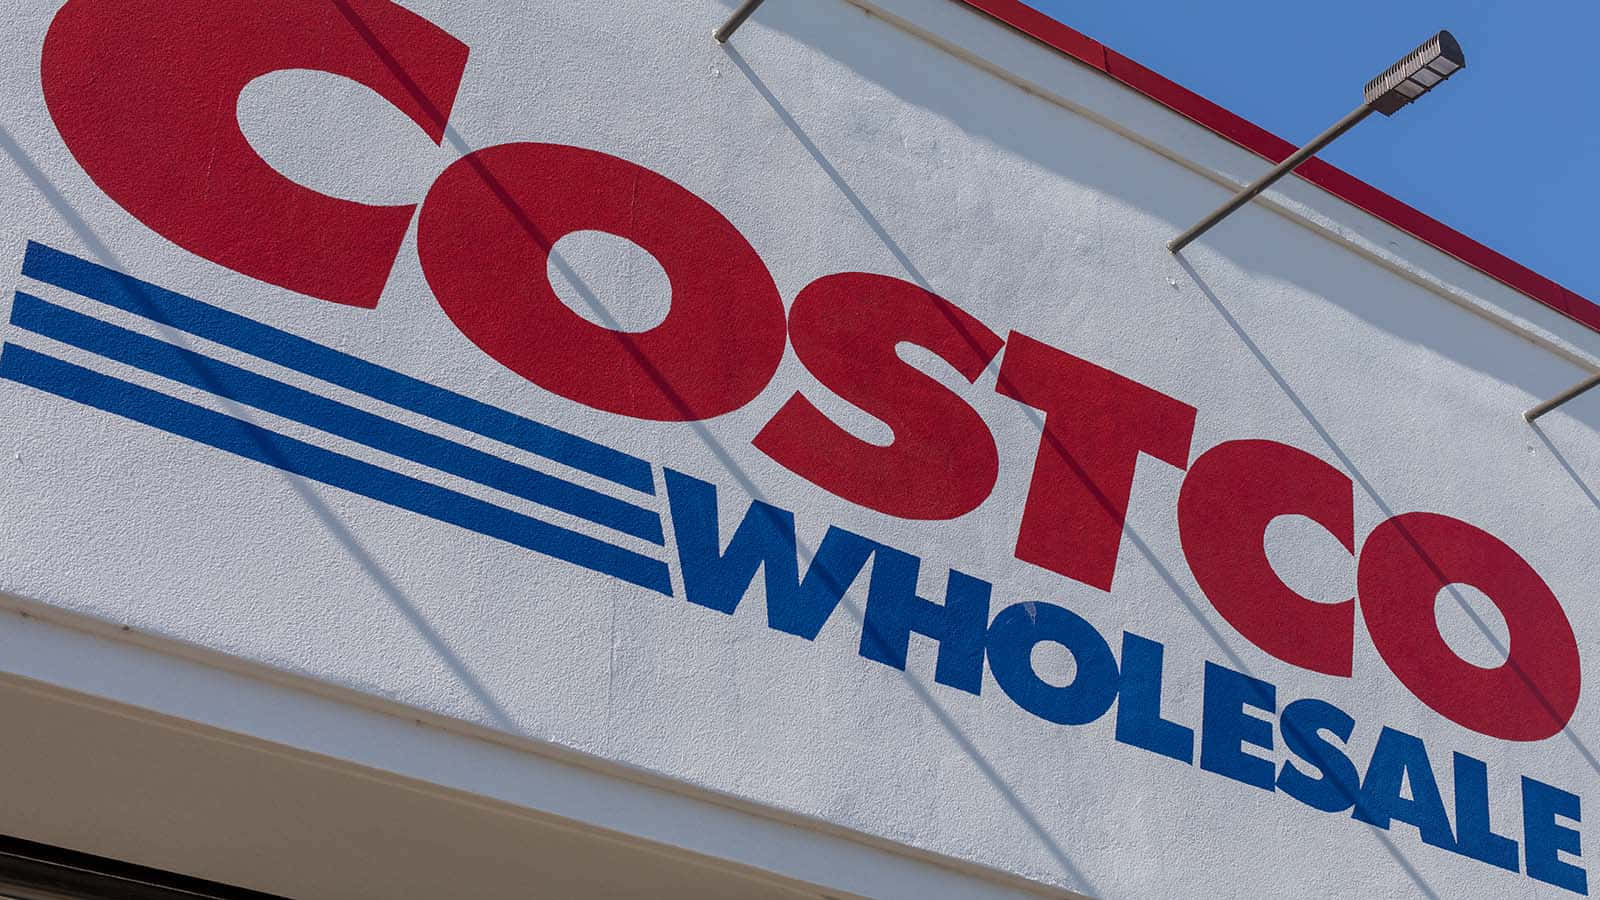 Costco Wholesale Is A Large Store With A Blue And Red Sign